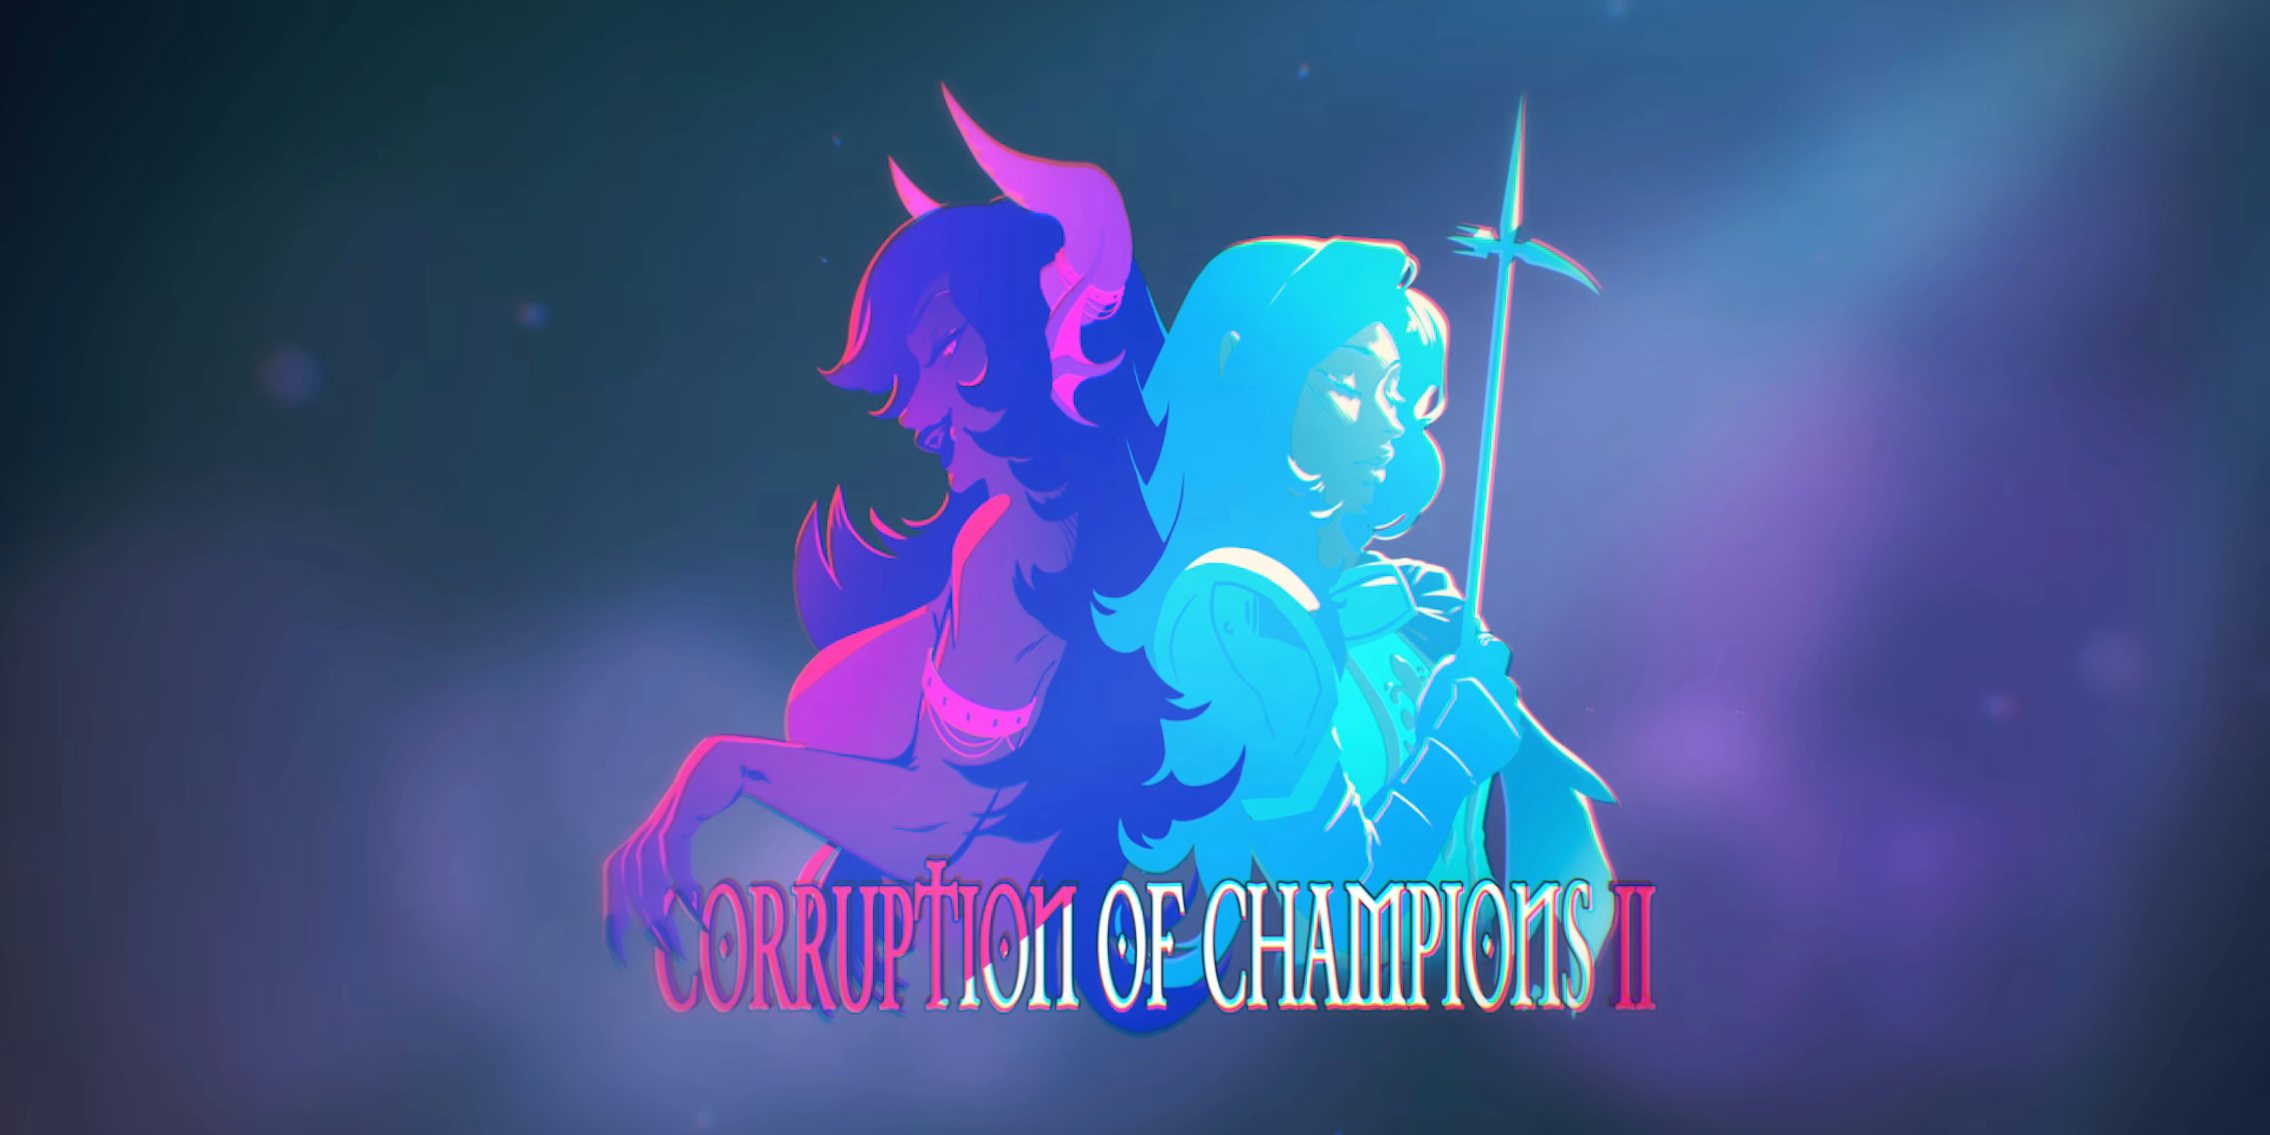 Corruption of Champions 2: Adult Game Heads to Steam